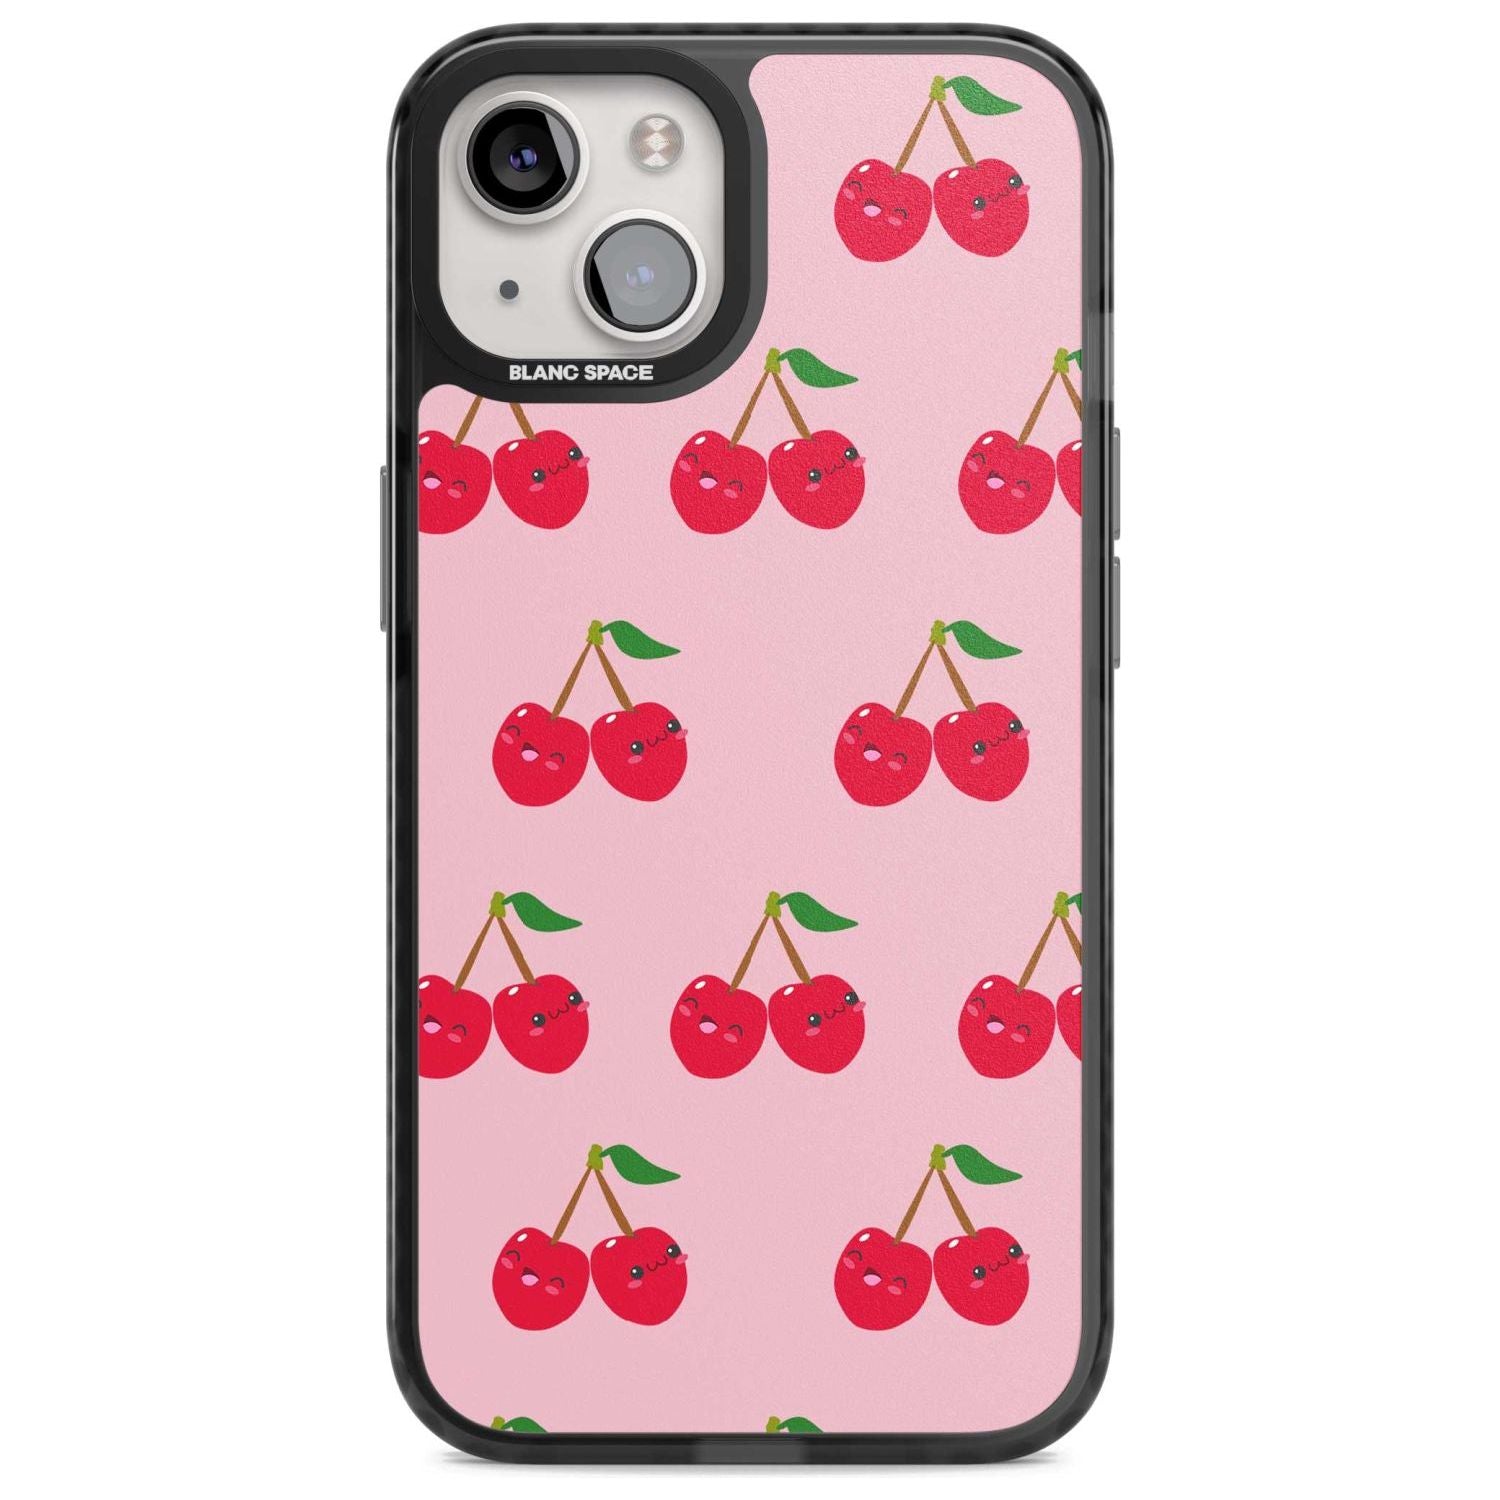 Cheeky Cherry Phone Case iPhone 15 / Magsafe Black Impact Case,iPhone 15 Plus / Magsafe Black Impact Case,iPhone 13 / Magsafe Black Impact Case,iPhone 14 / Magsafe Black Impact Case,iPhone 14 Plus / Magsafe Black Impact Case Blanc Space